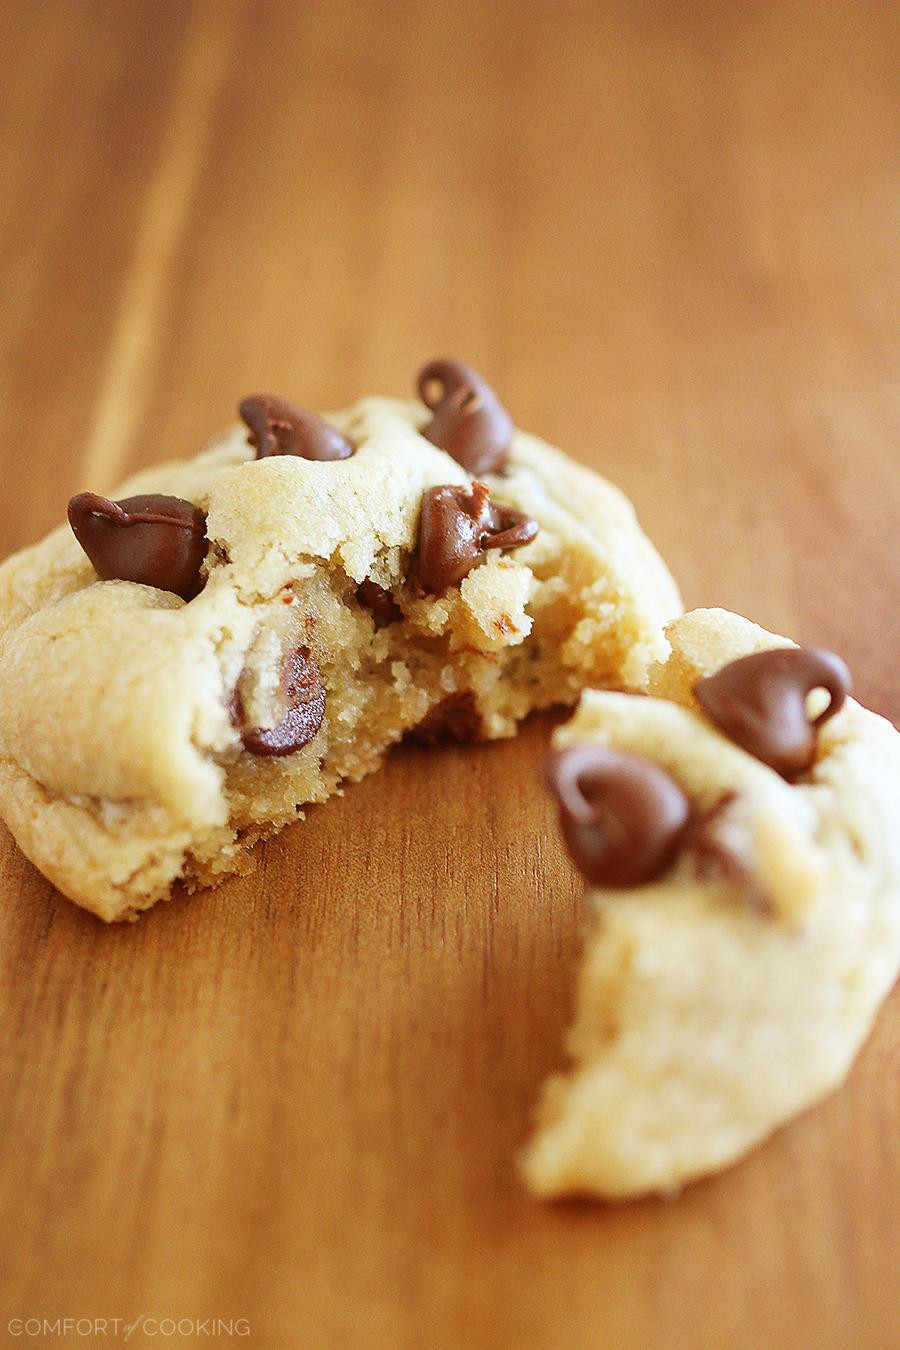 Soft Chewy Choc Chip Cookies Recipe
 Best Ever Soft Chewy Chocolate Chip Cookies